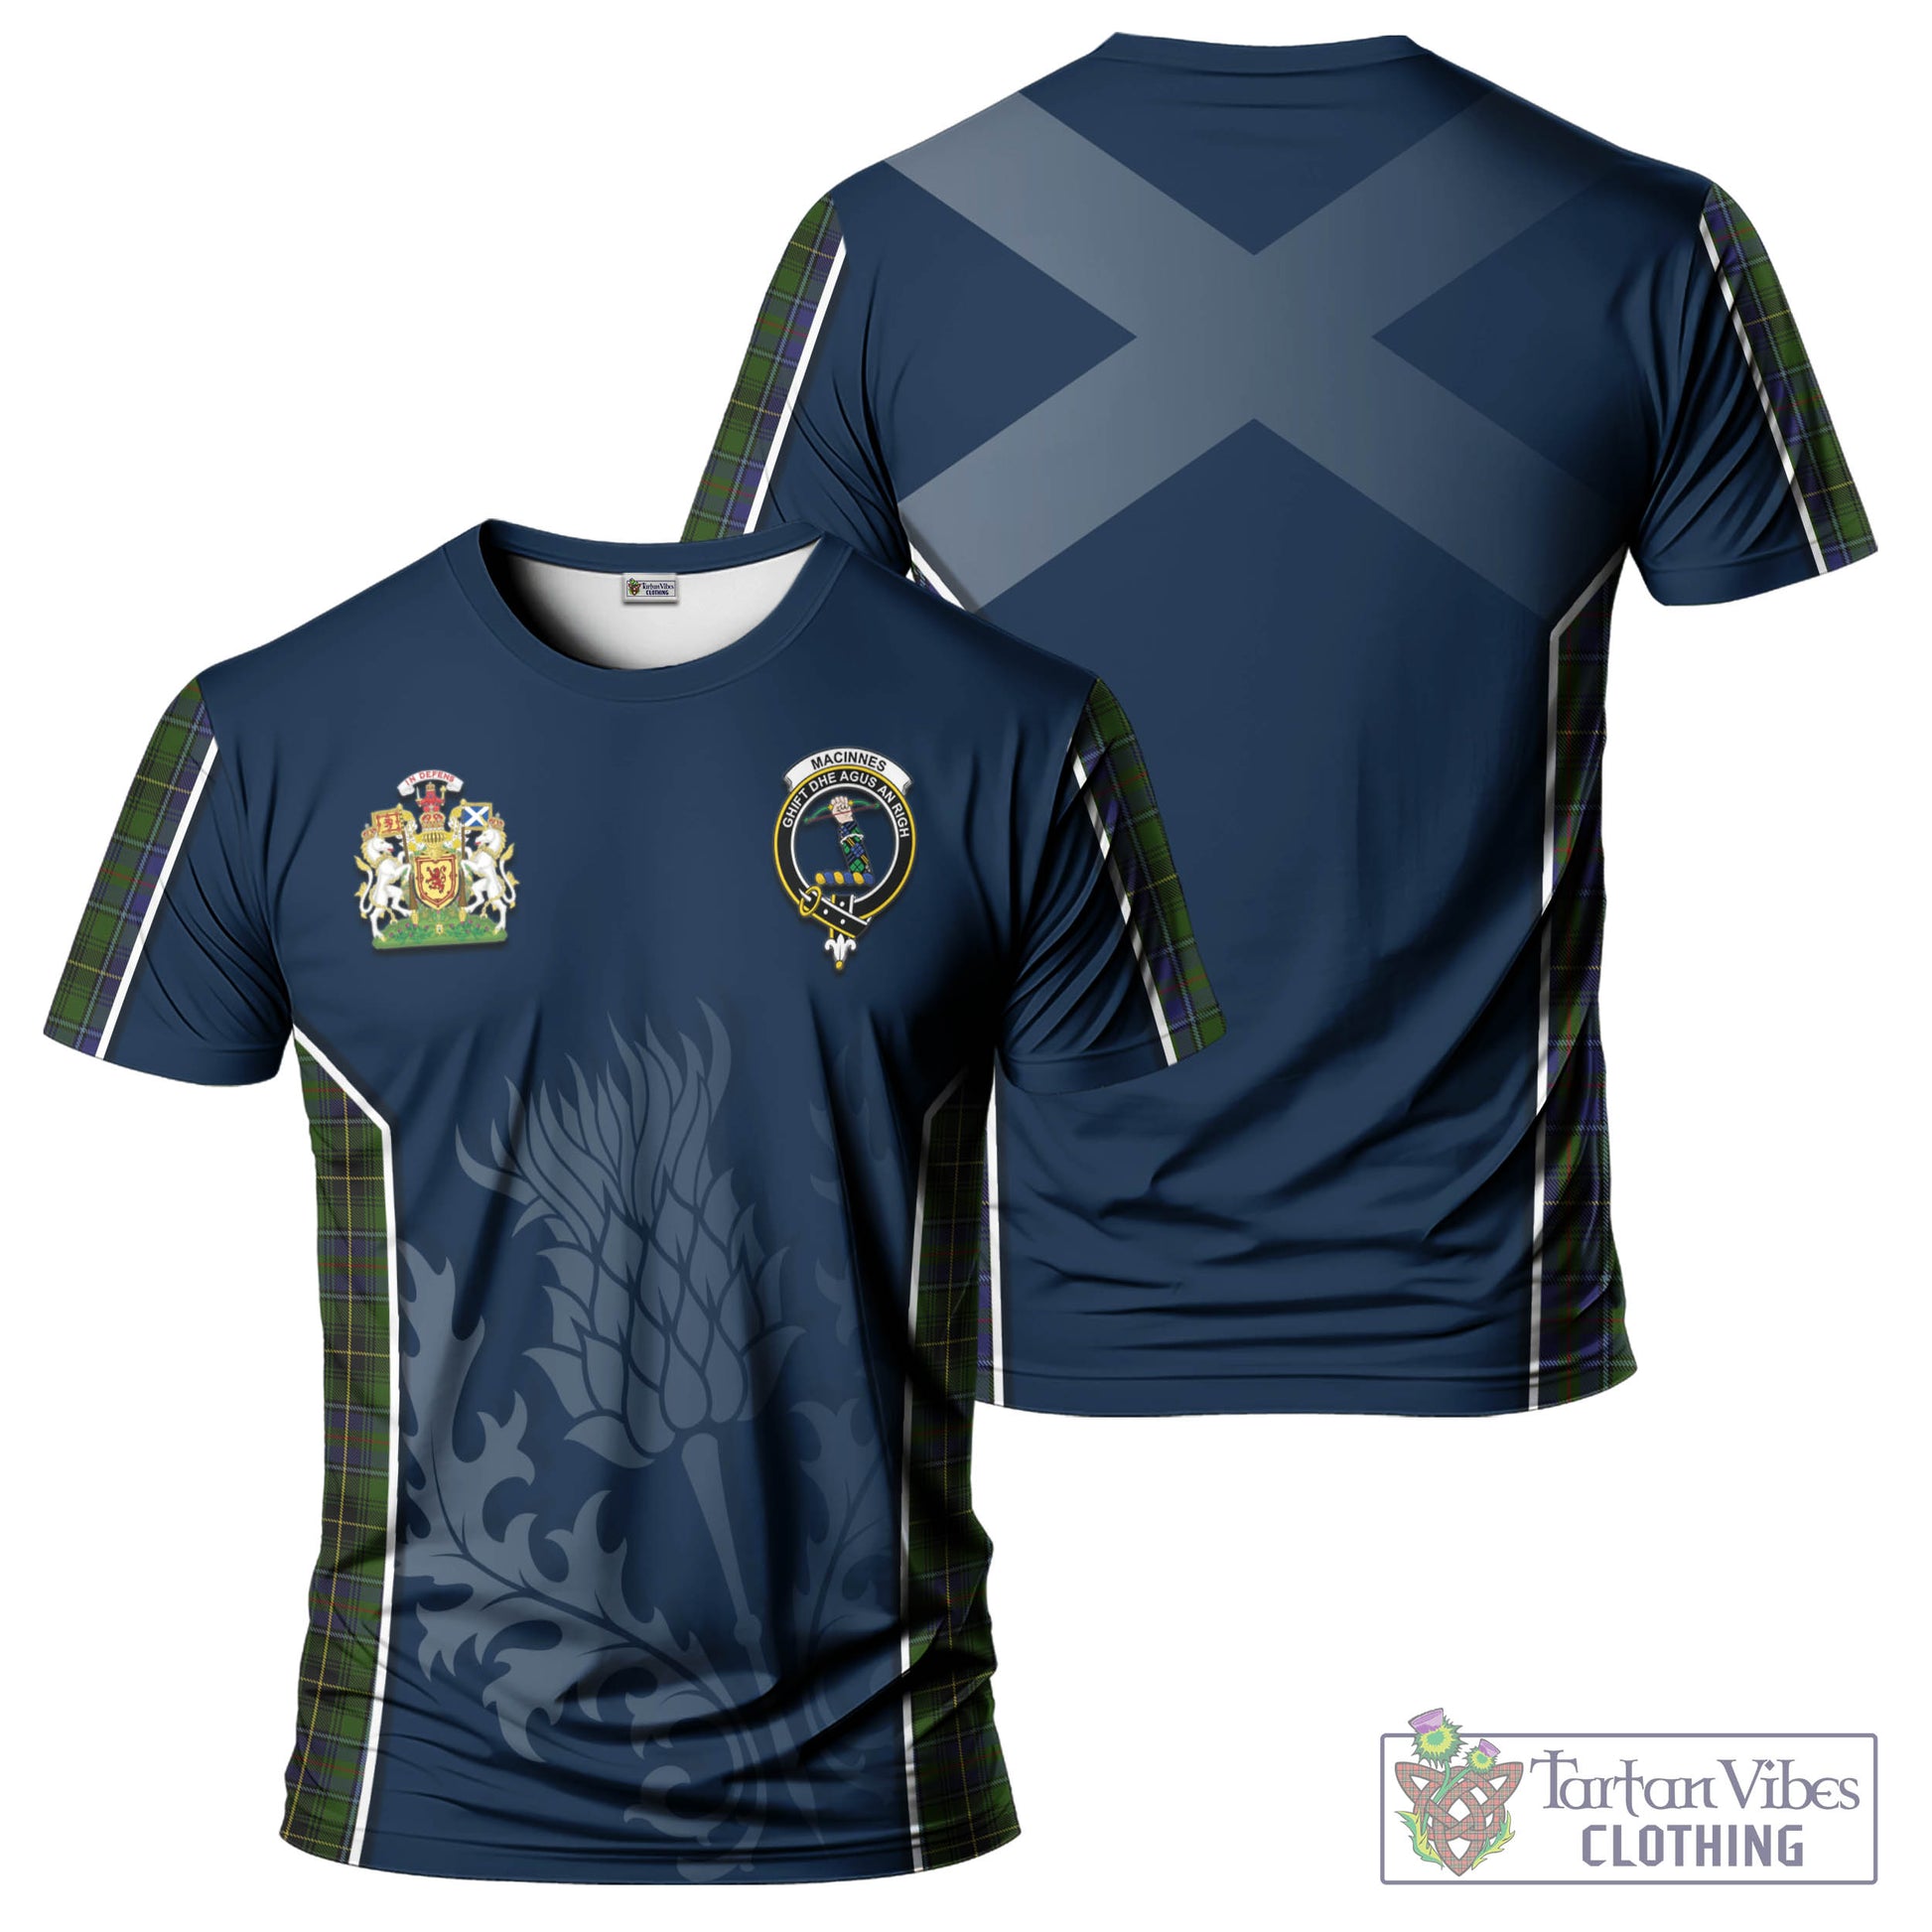 Tartan Vibes Clothing MacInnes Tartan T-Shirt with Family Crest and Scottish Thistle Vibes Sport Style